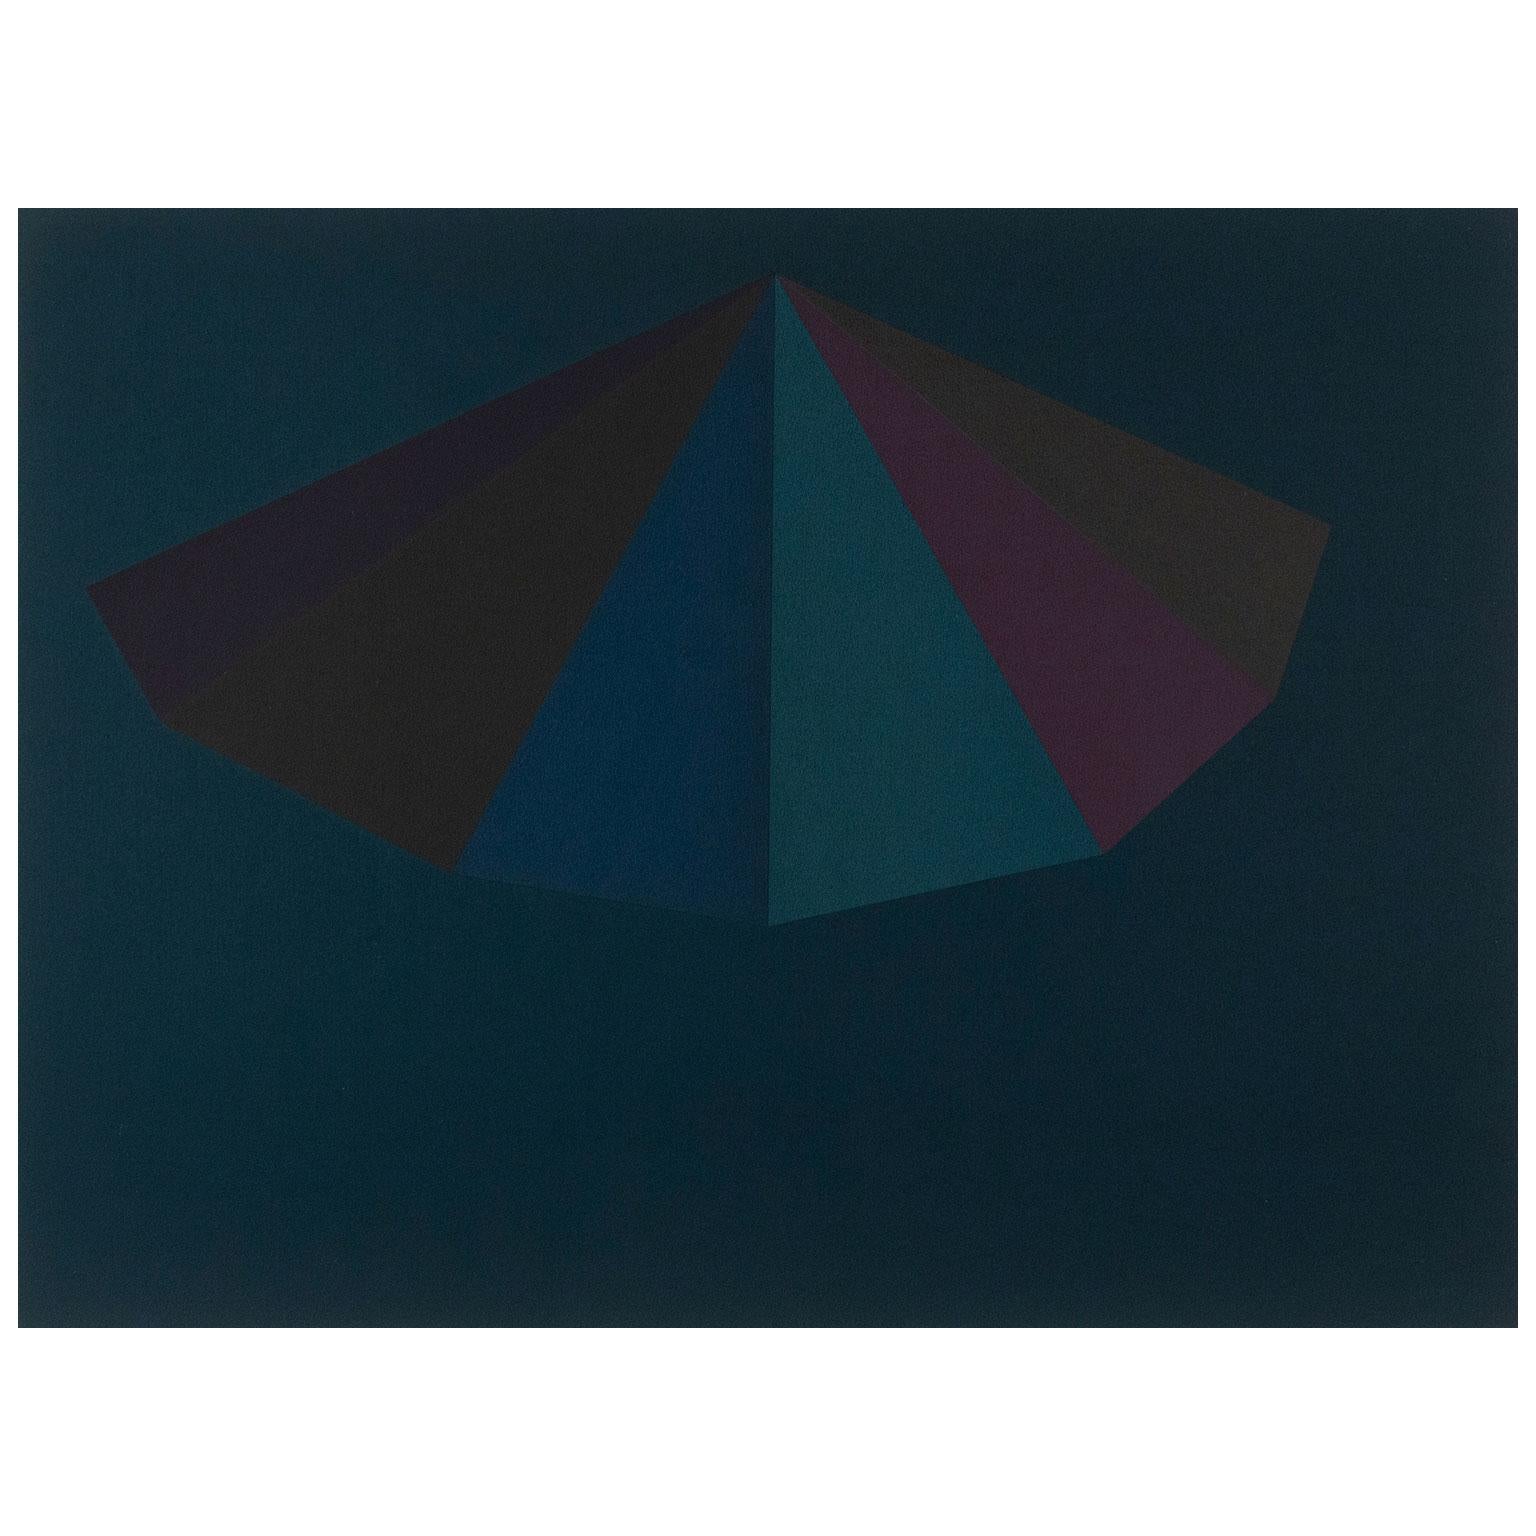 A Pyramid - Abstract Geometric Print by Sol LeWitt